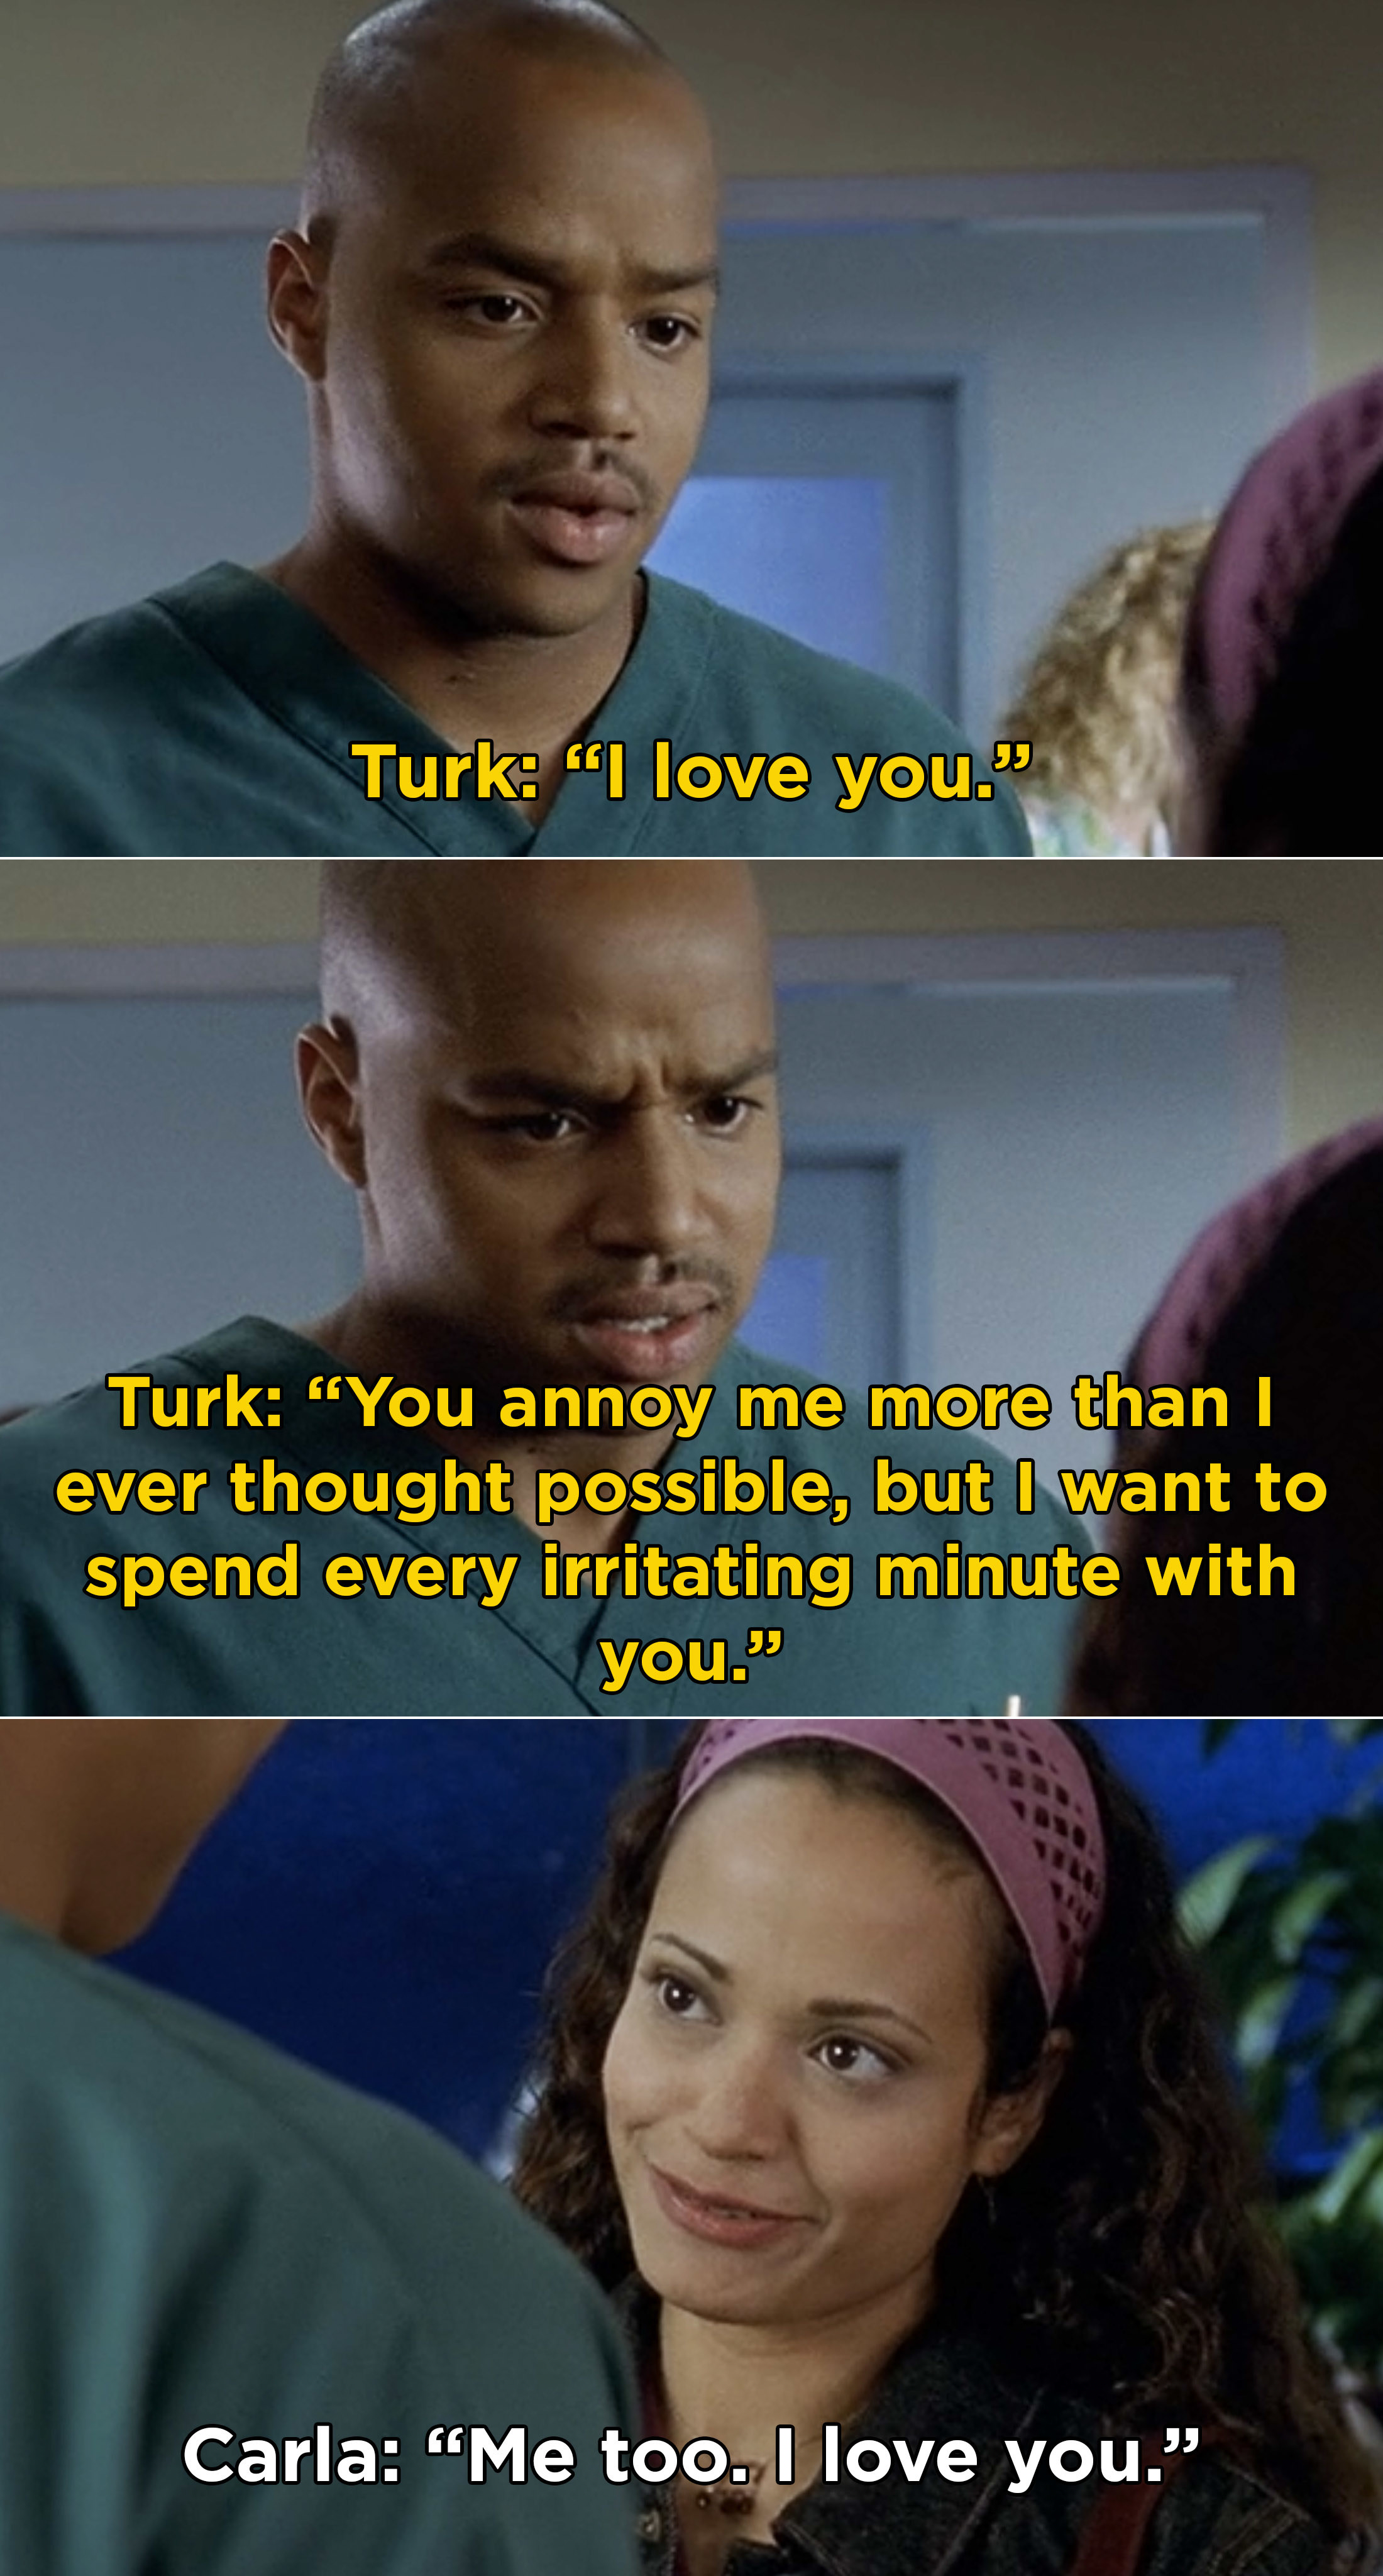 Turk saying that Carla annoys him, but he loves her and wants to spend &quot;every irritating minute&quot; with her